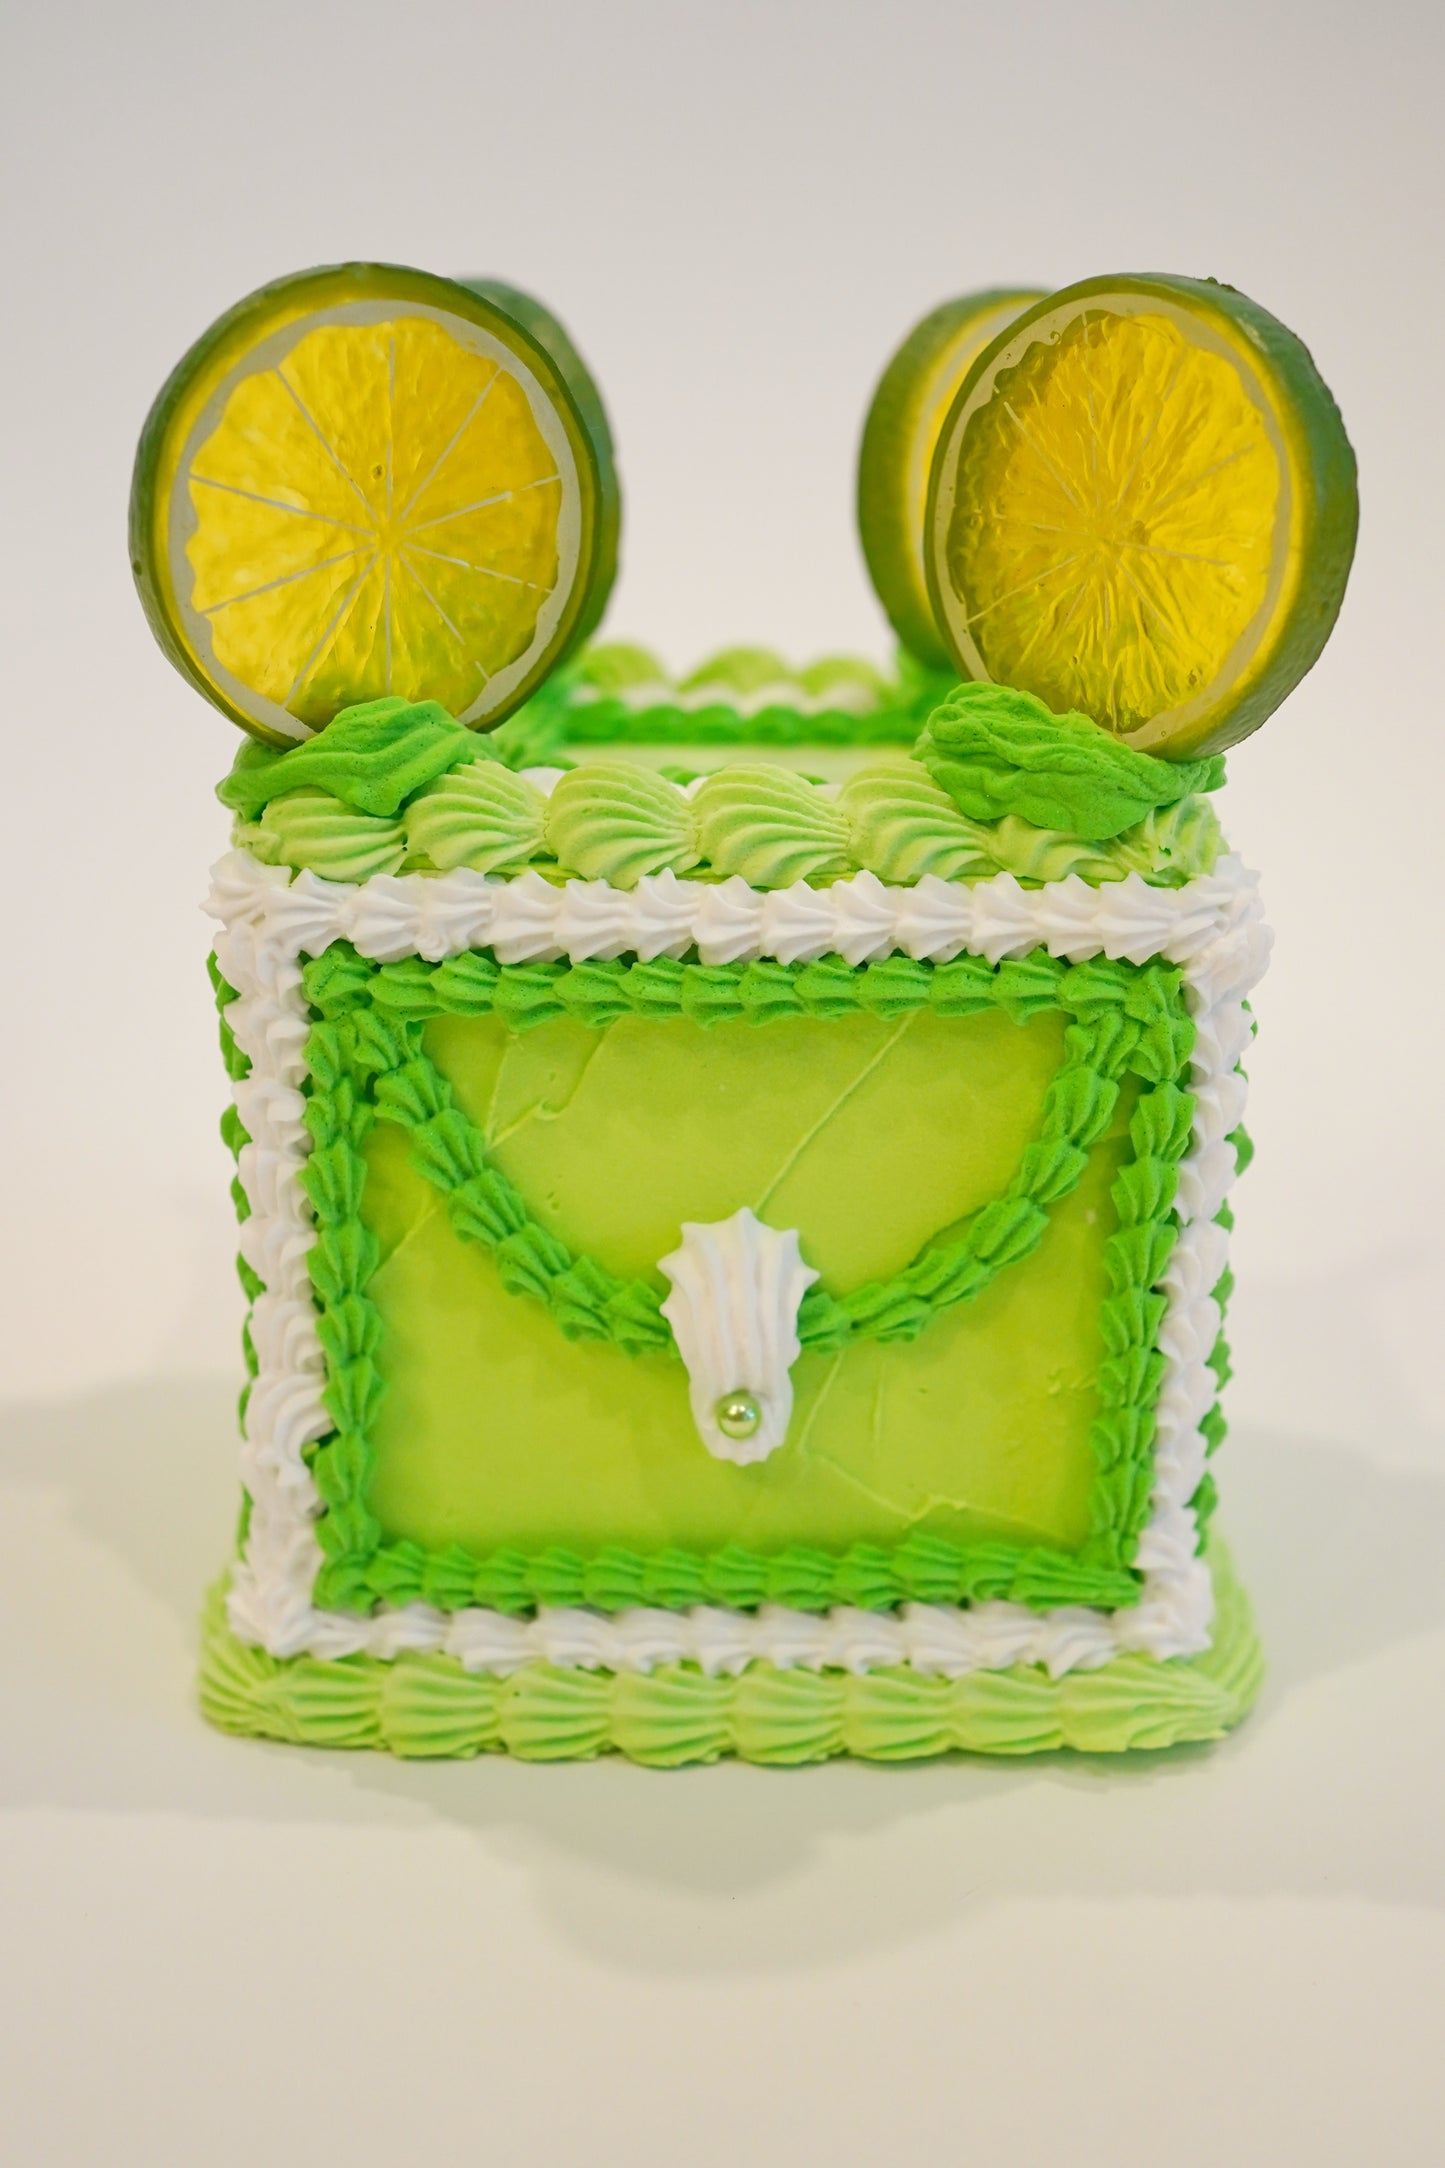 Vintage Small Square Lime Cake with Fruit